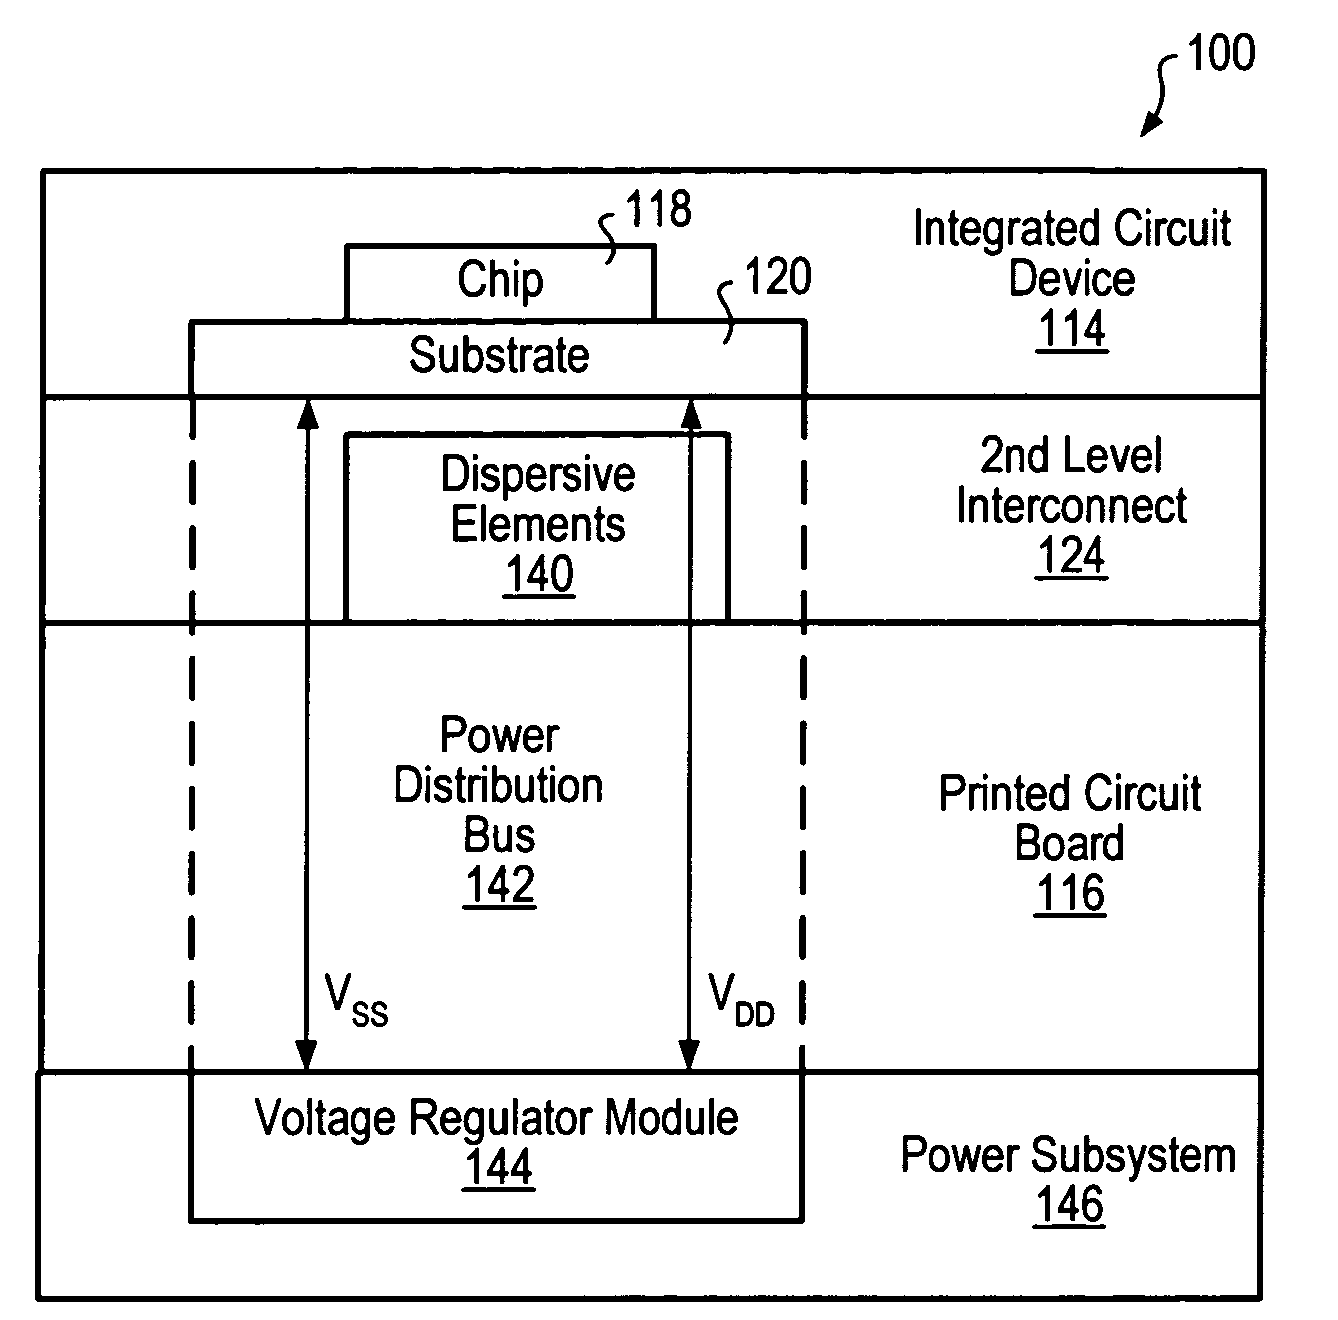 Dispersive interconnect system for EMI reduction